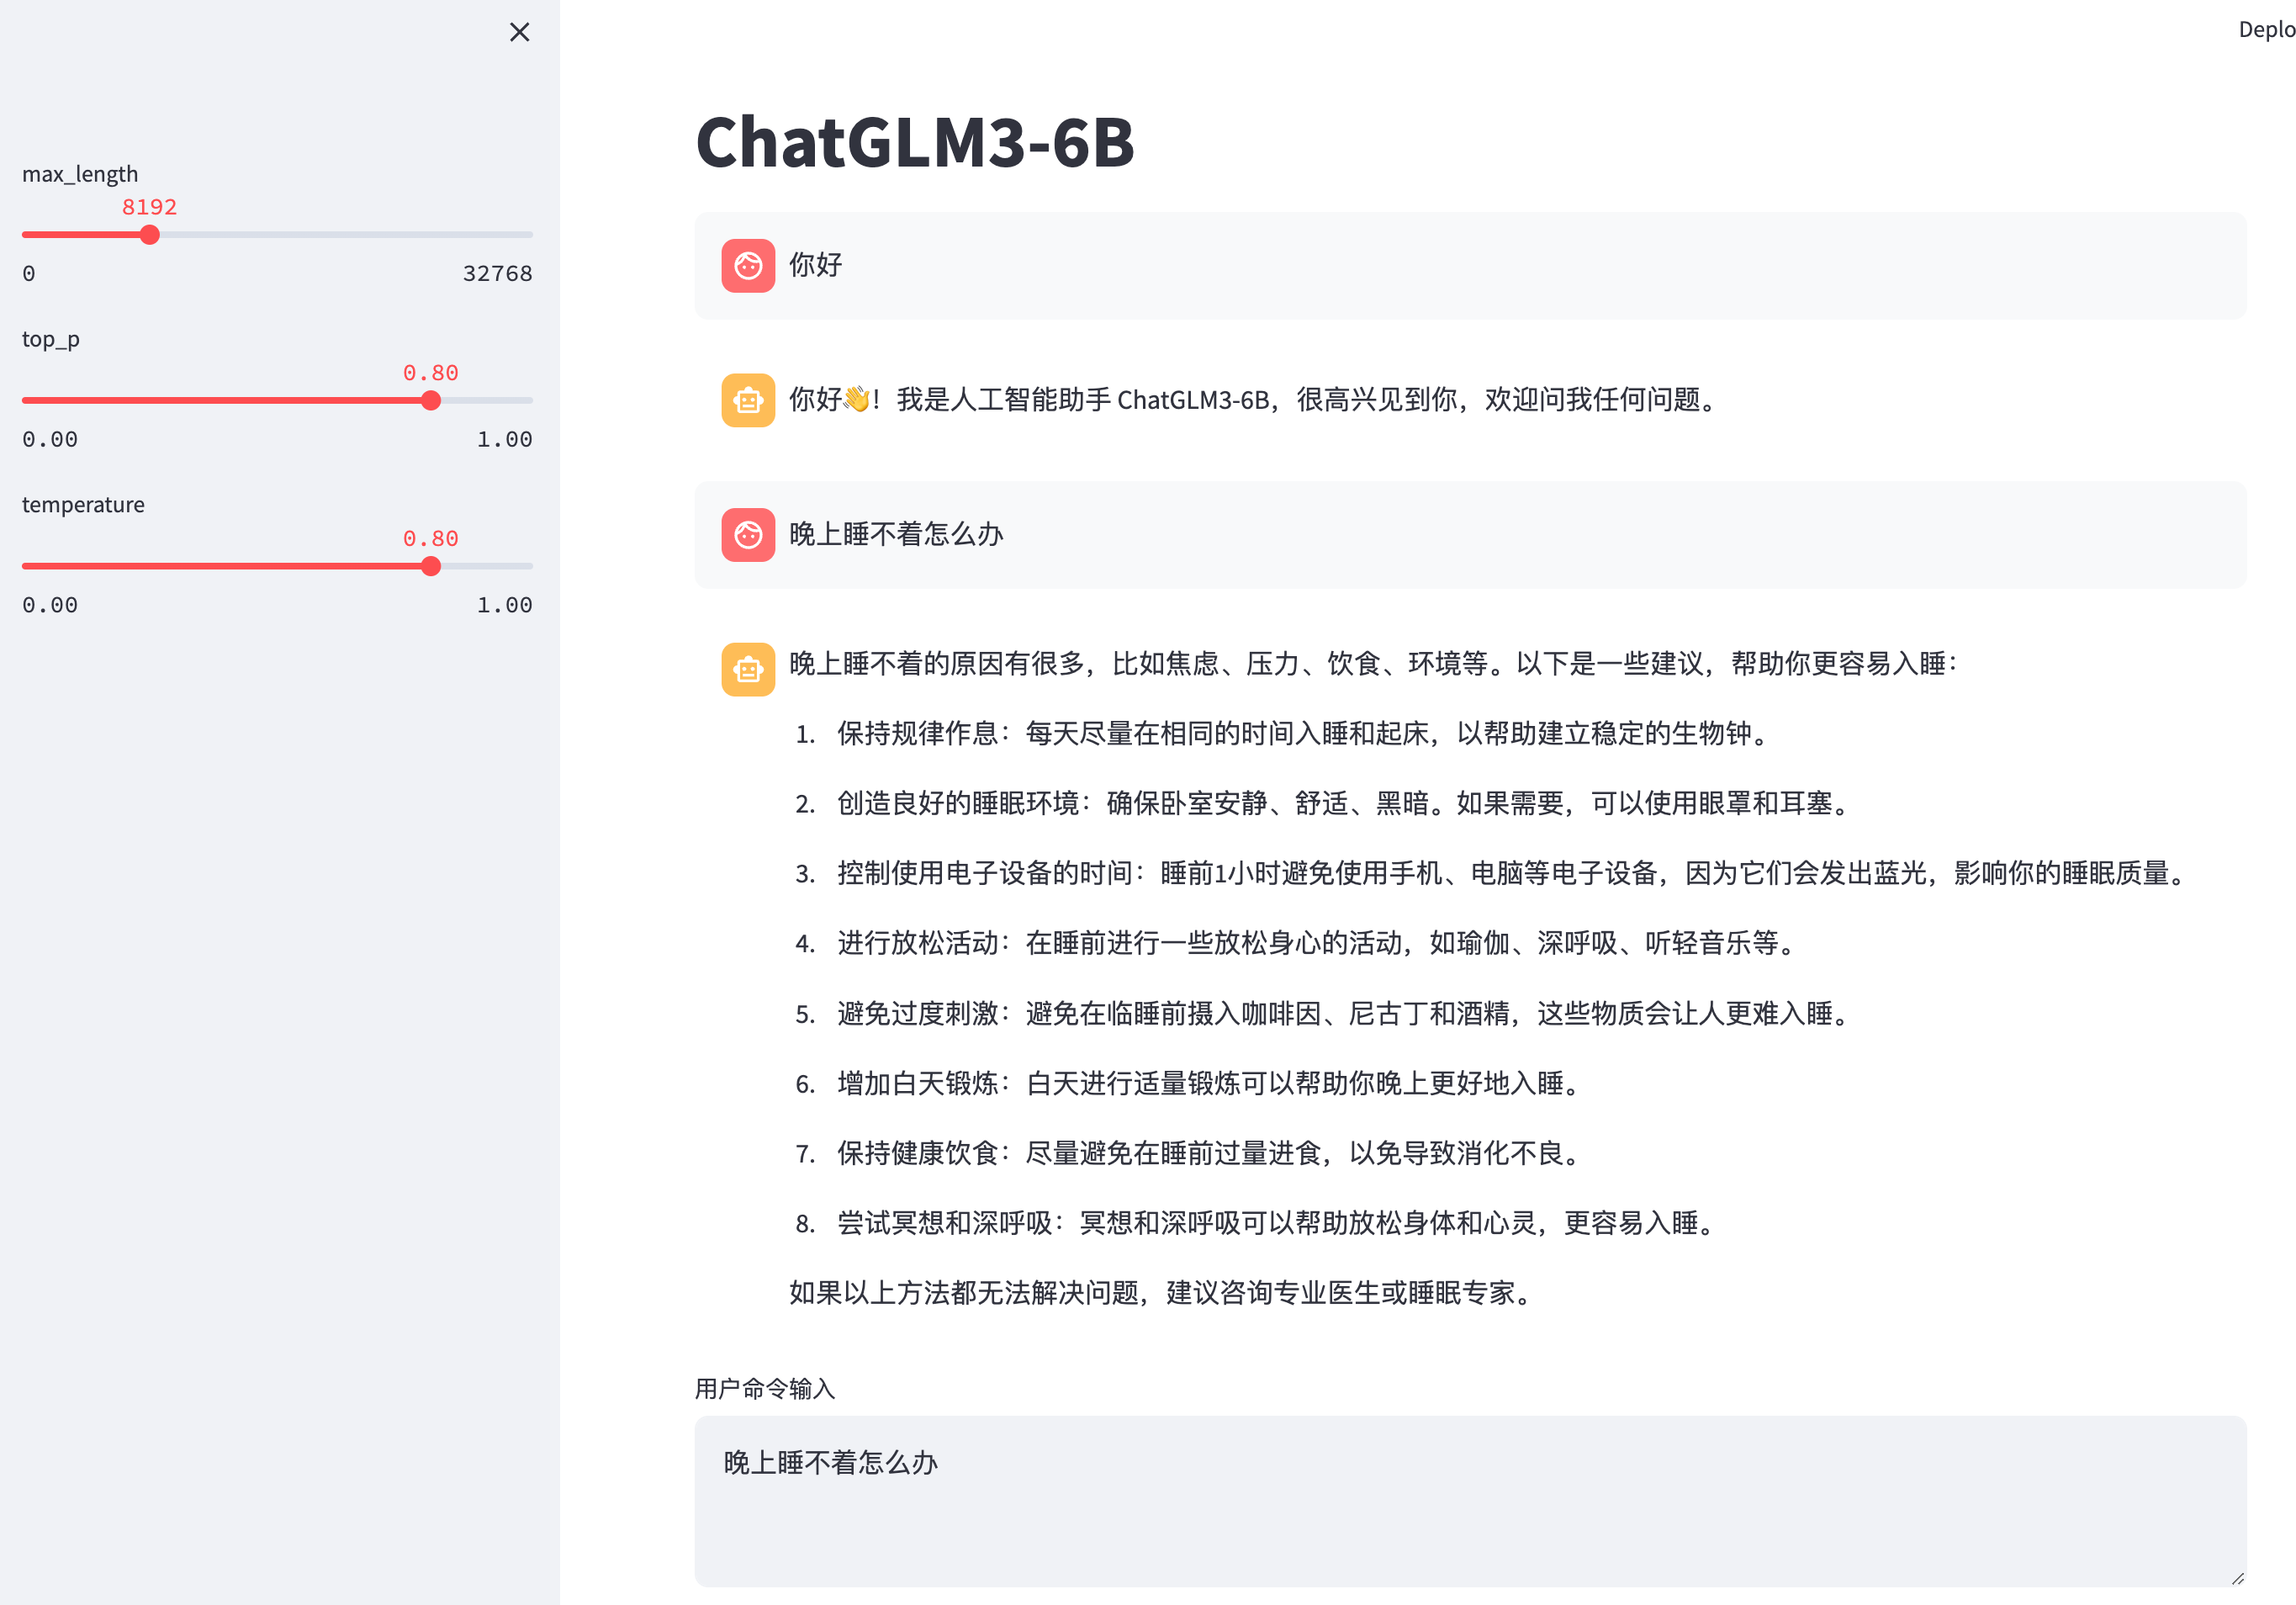 demo-picture-of-ChatGLM3